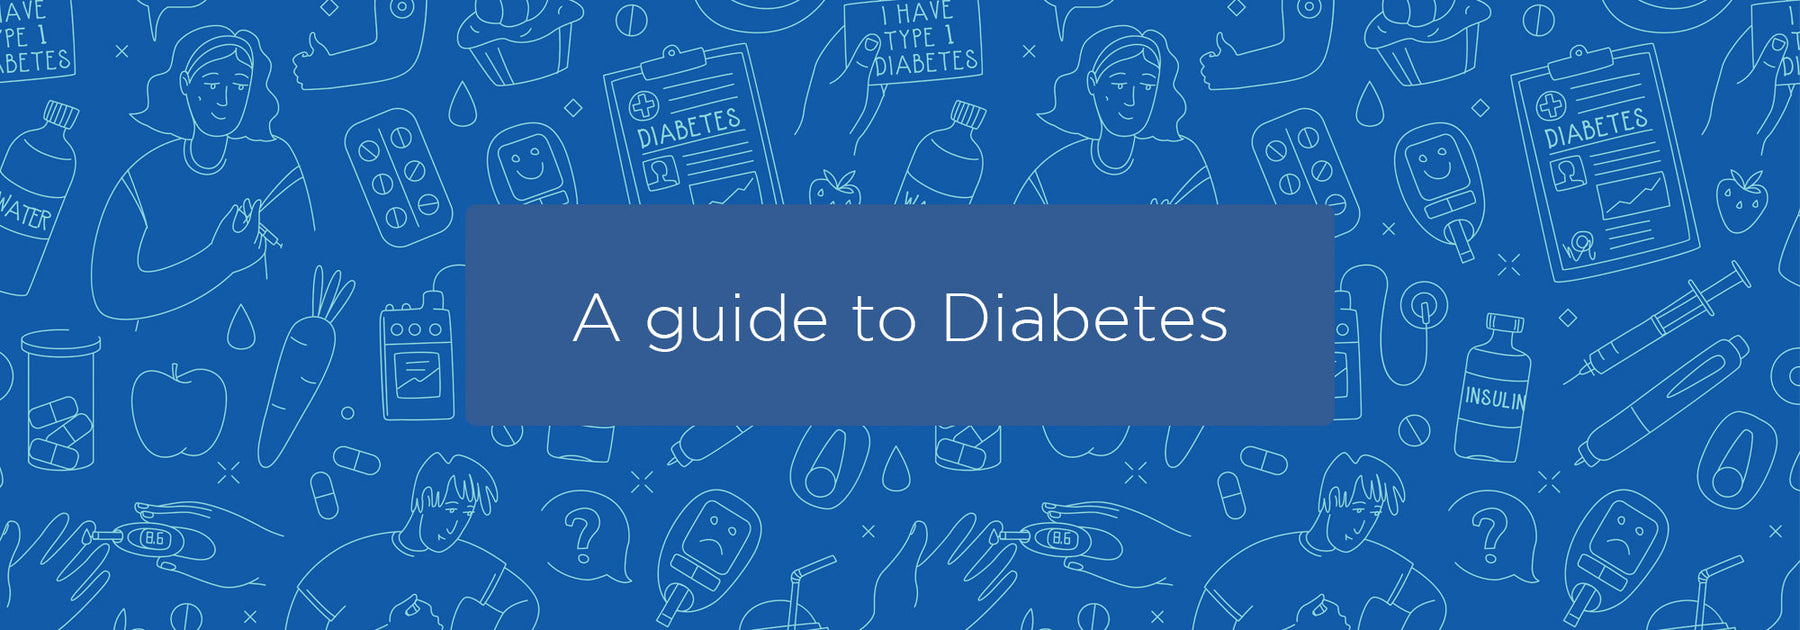 guide to diabetes